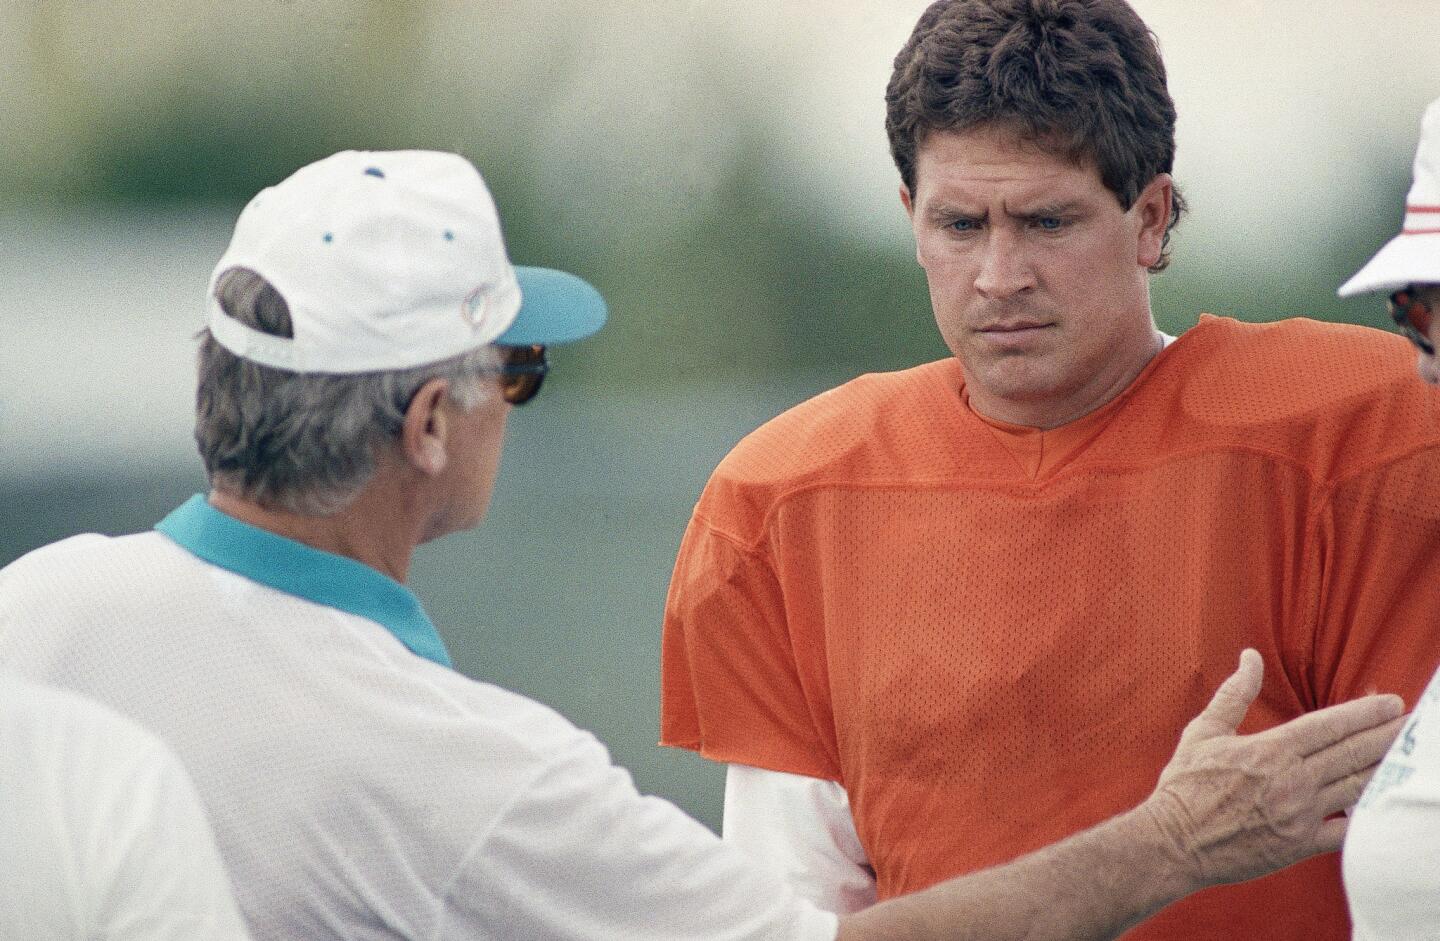 Miami Dolphins coach Don Shula, left, talks with quarterback Dan Marino before practice at St. Thomas University, Wednesday, Jan. 6, 1993, Miami, Fla. The Dolphins will face the San Diego Chargers in an NFC Playoff game on Sunday, January 10. (AP Photo/Dave Bergman)